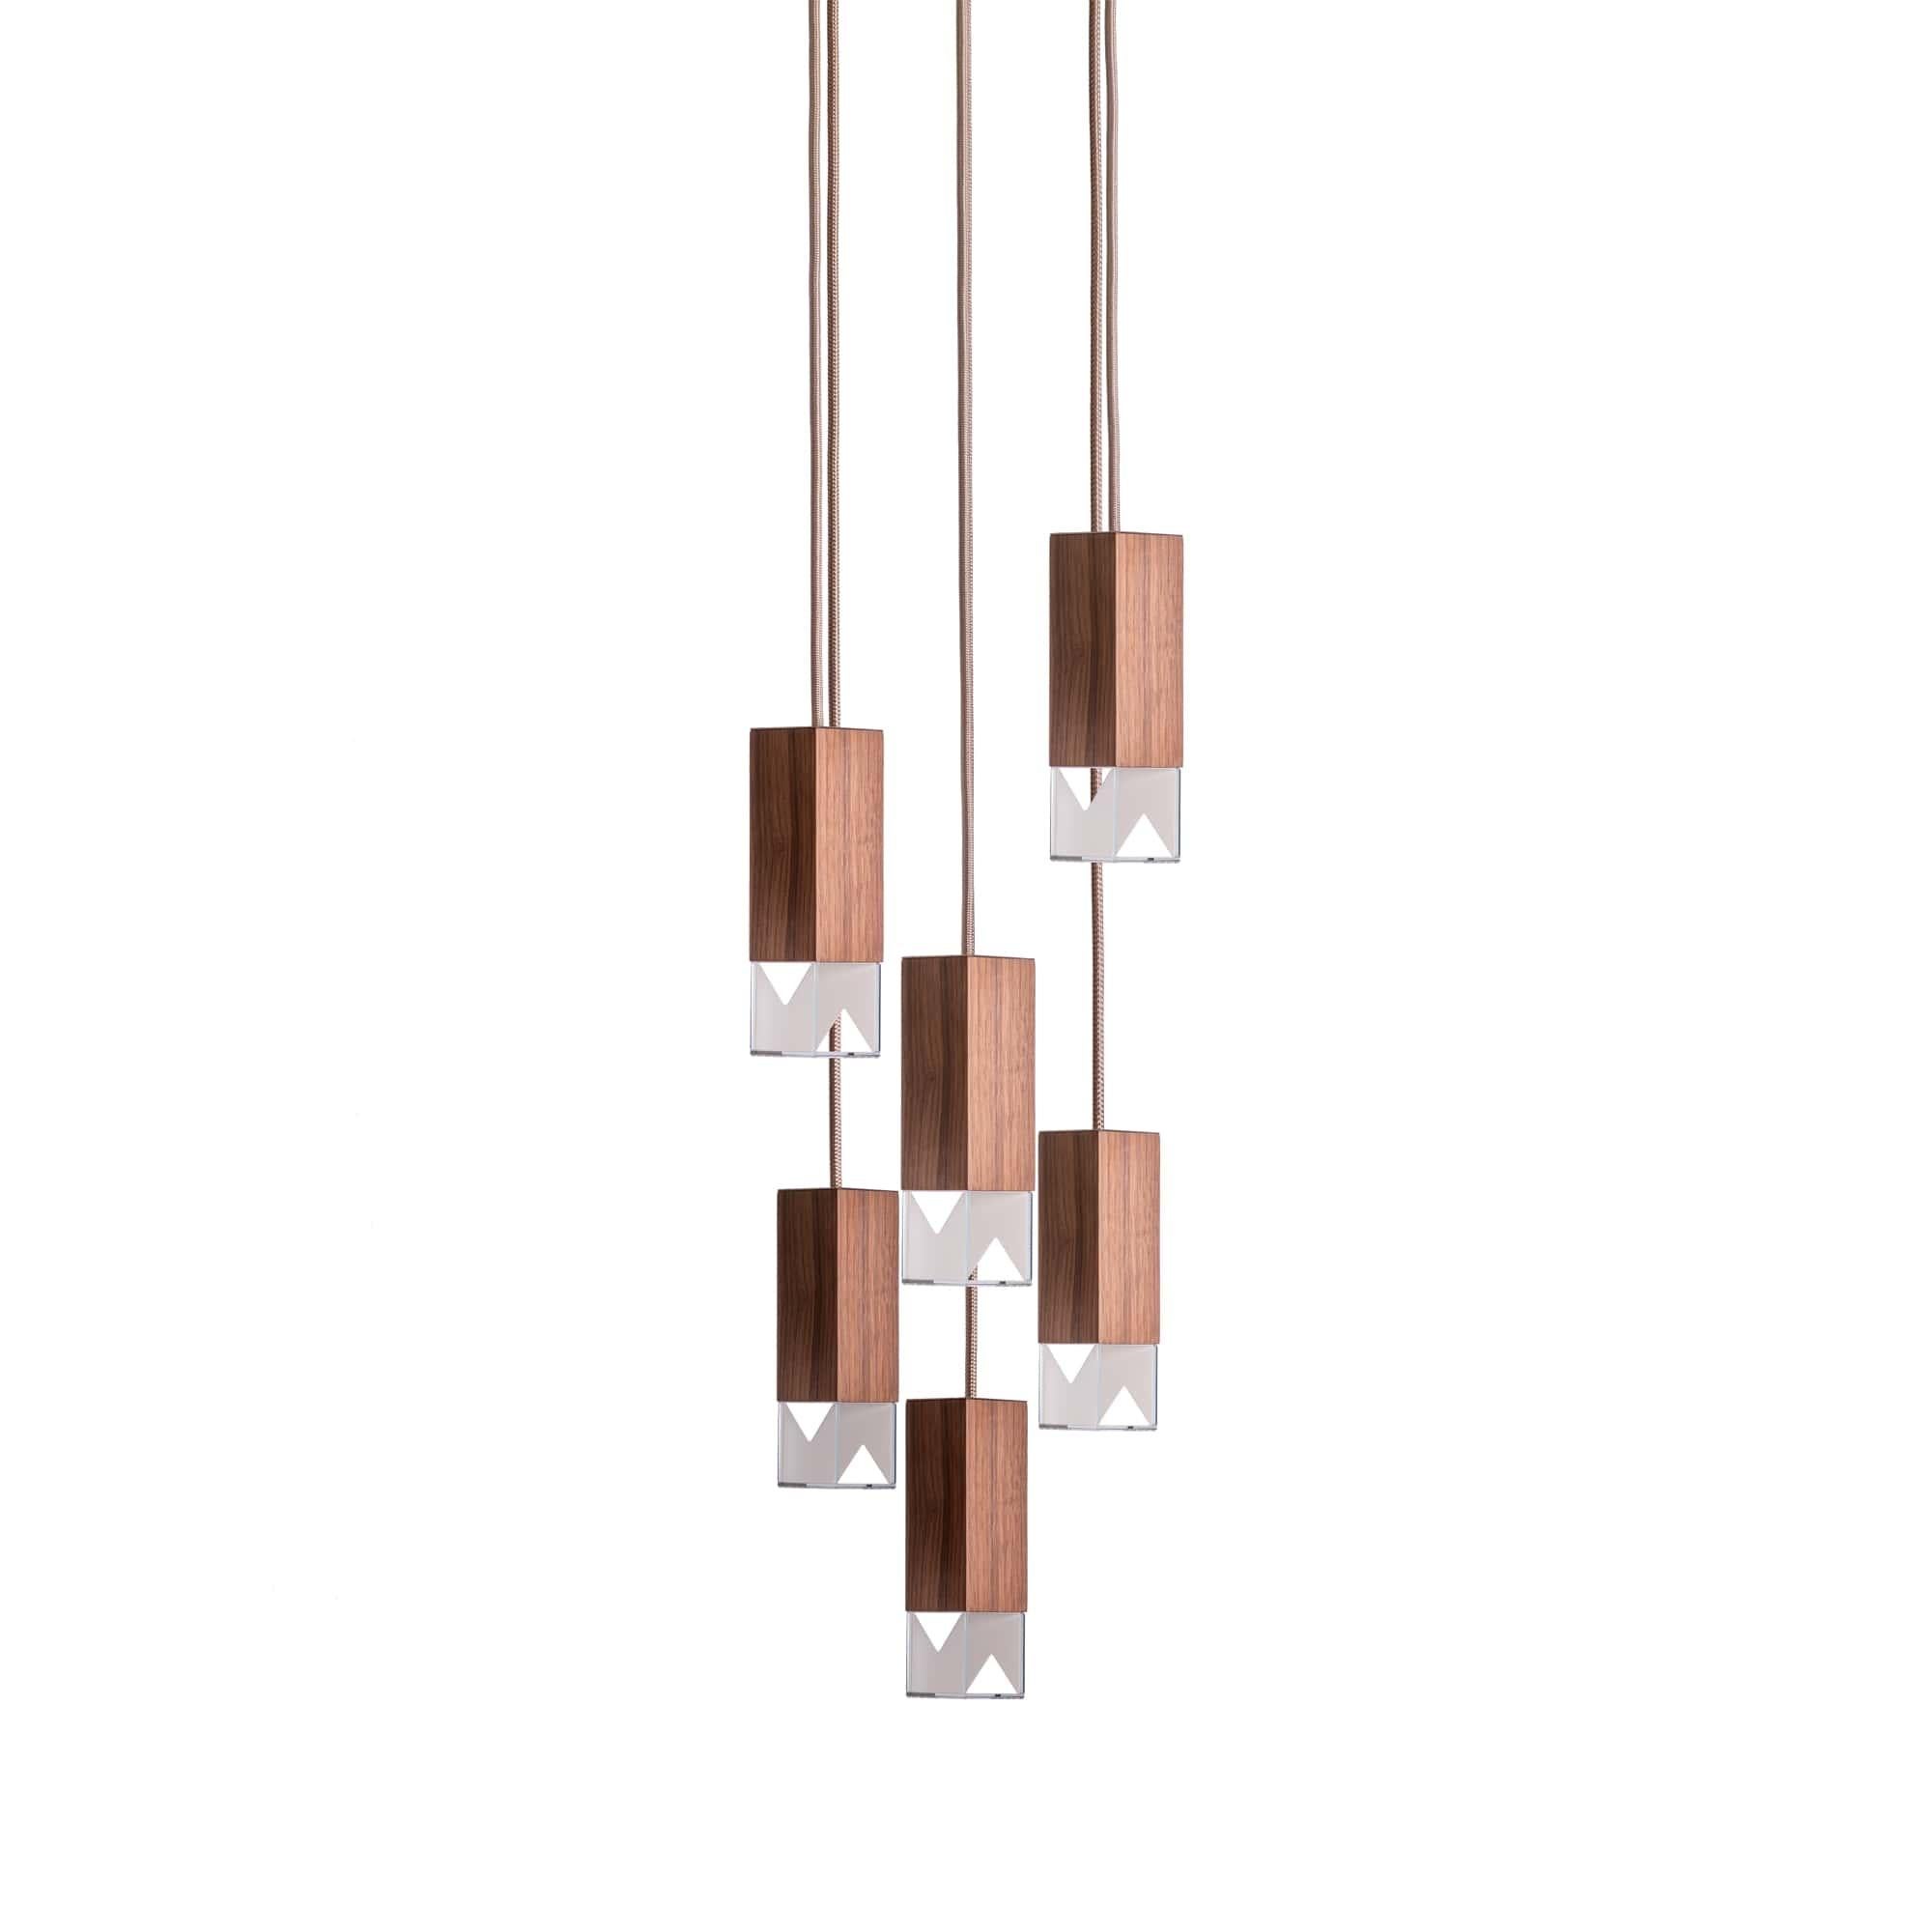 Lamp one 6-light chandelier in walnut by Formaminima
Dimensions: H 93 x 30 x 30 cm
Materials: lamp body in marble

Ultra-thin anti-reflection crystal diffuser
Inside-diffuser Limoges biscuit-finish porcelain sheets
Satin brass ceiling rose h